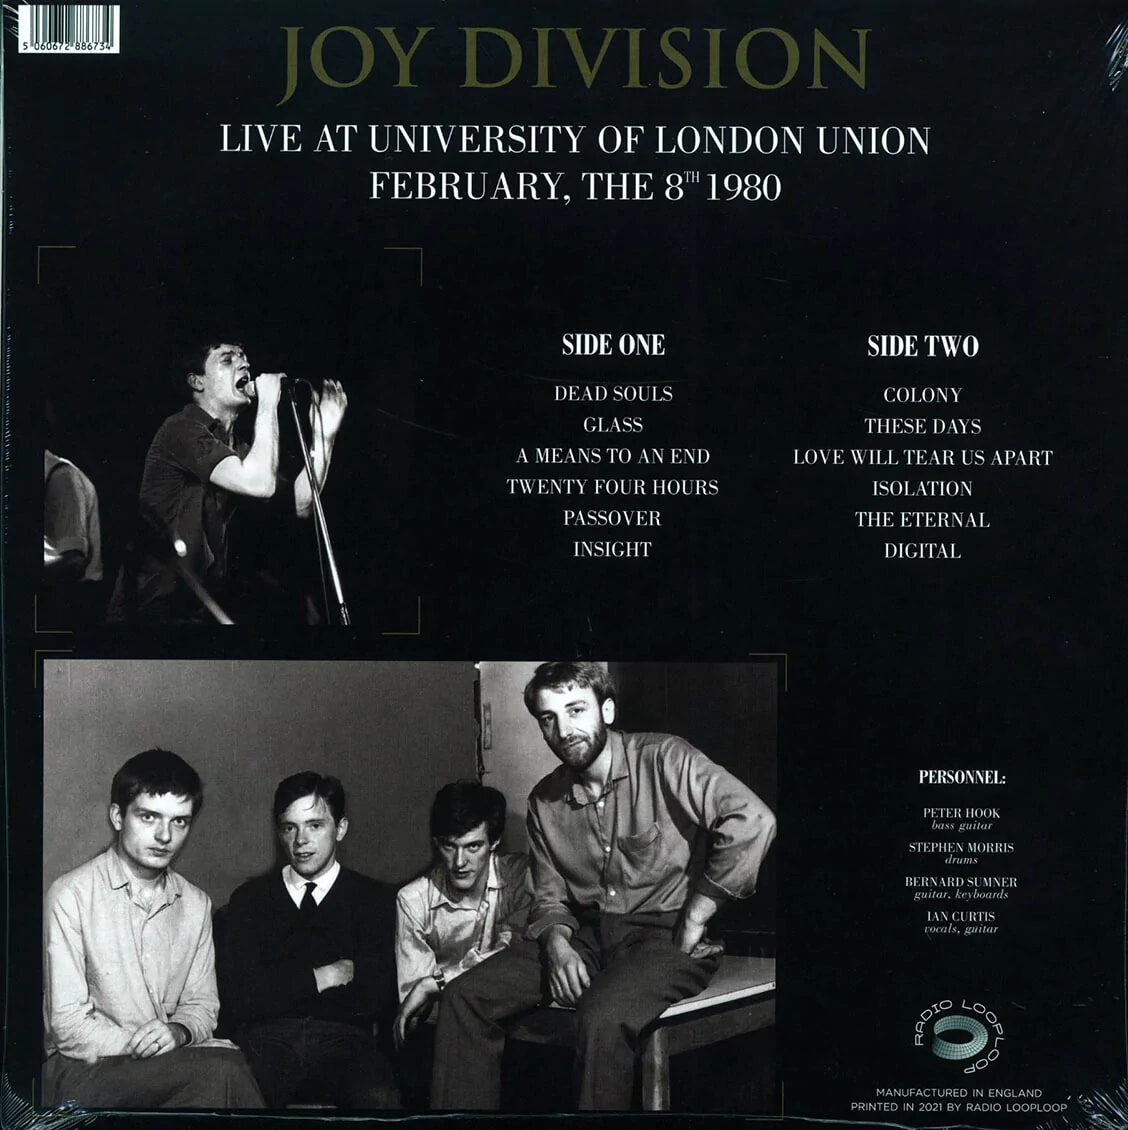 Joy Division (조이 디비전) - Live At University Of London Union, February, The 8th 1980 [LP] 